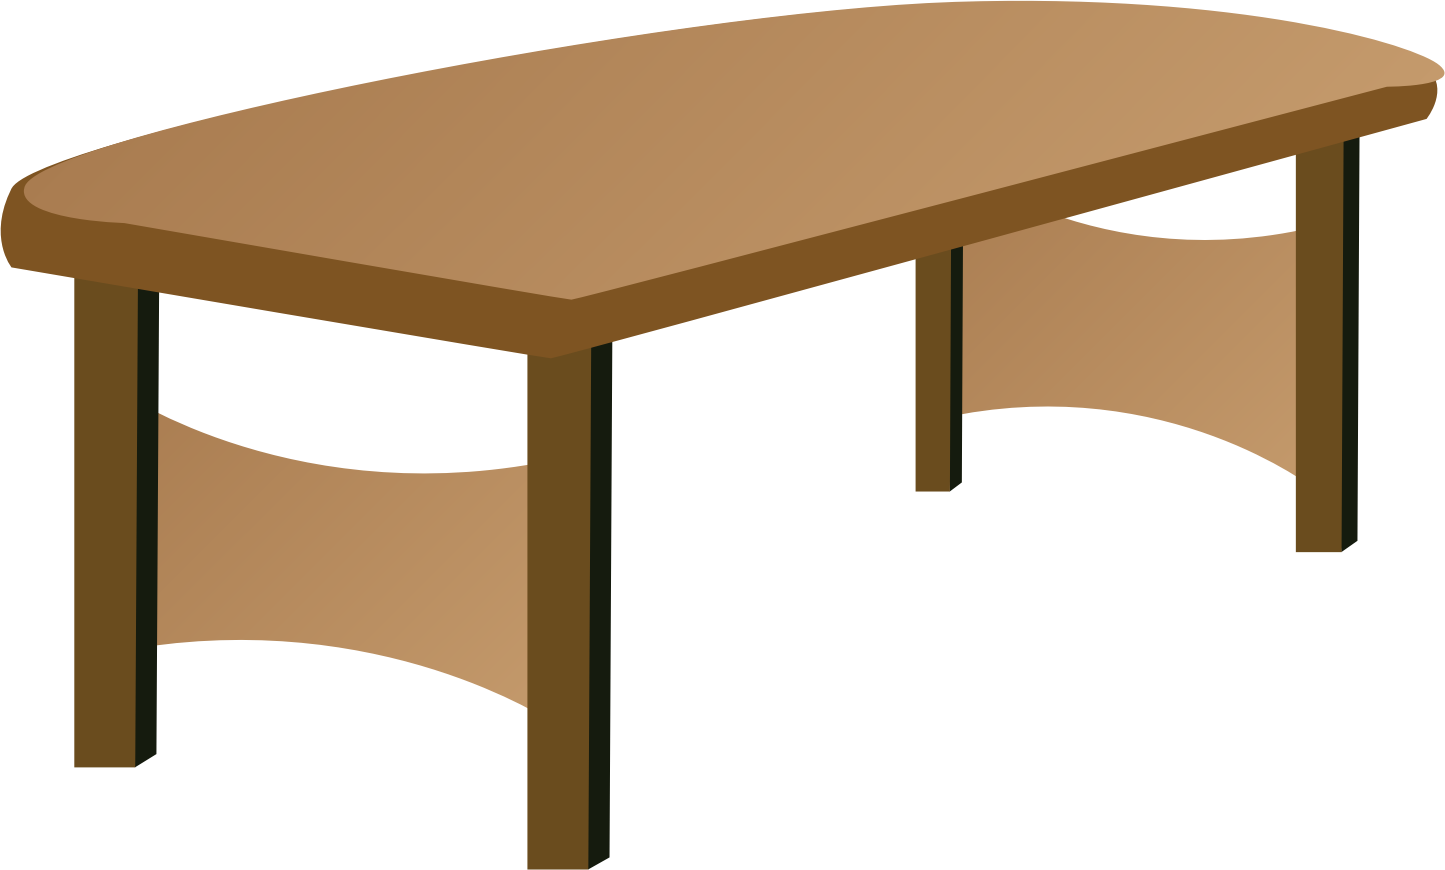 A Table With Legs And A Black Background